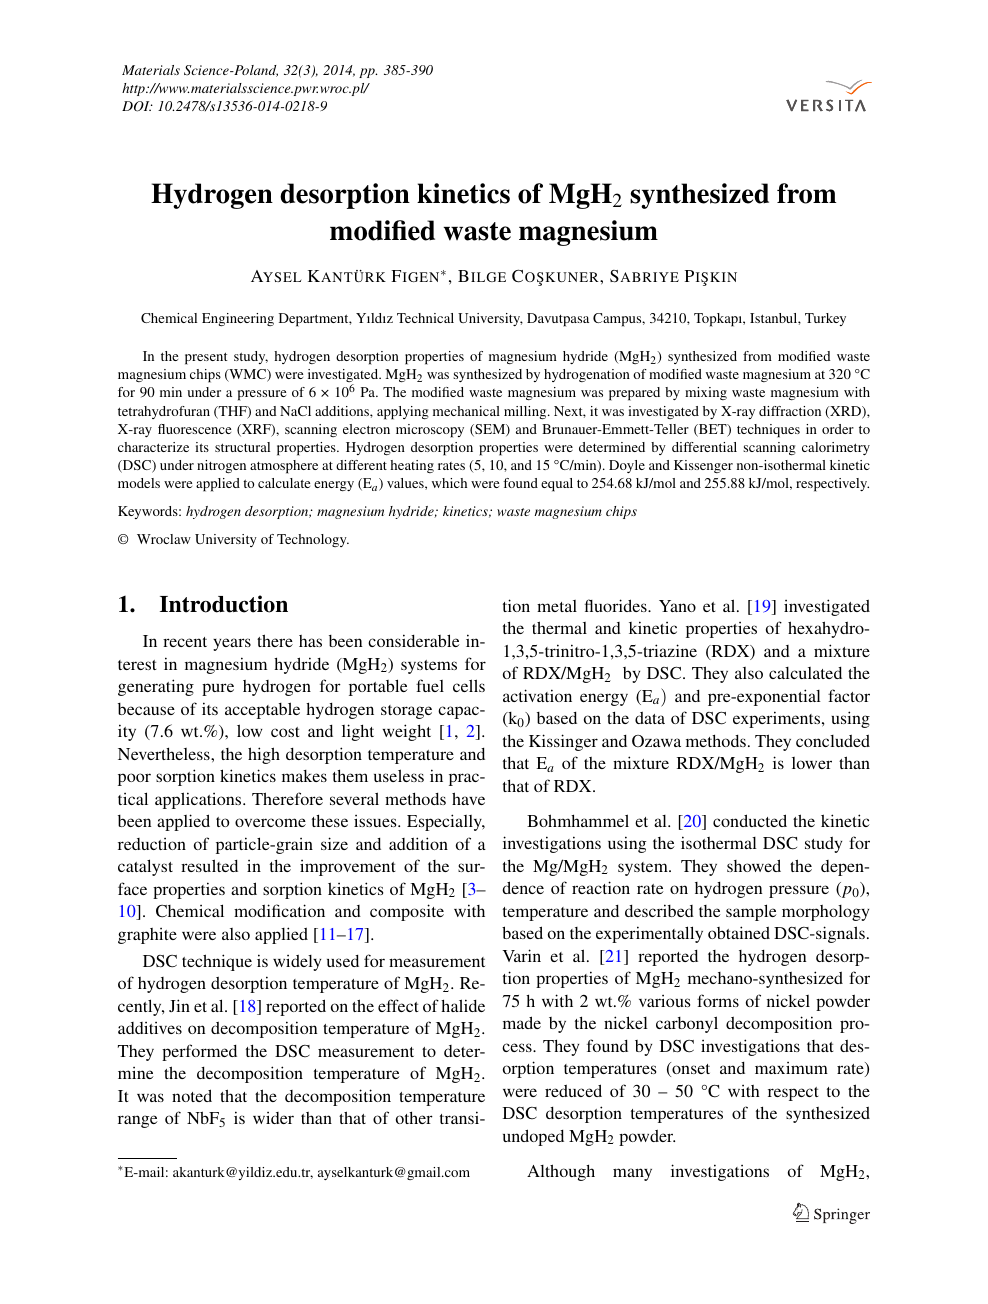 Hydrogen desorption kinetics of MgH2 synthesized from modified 